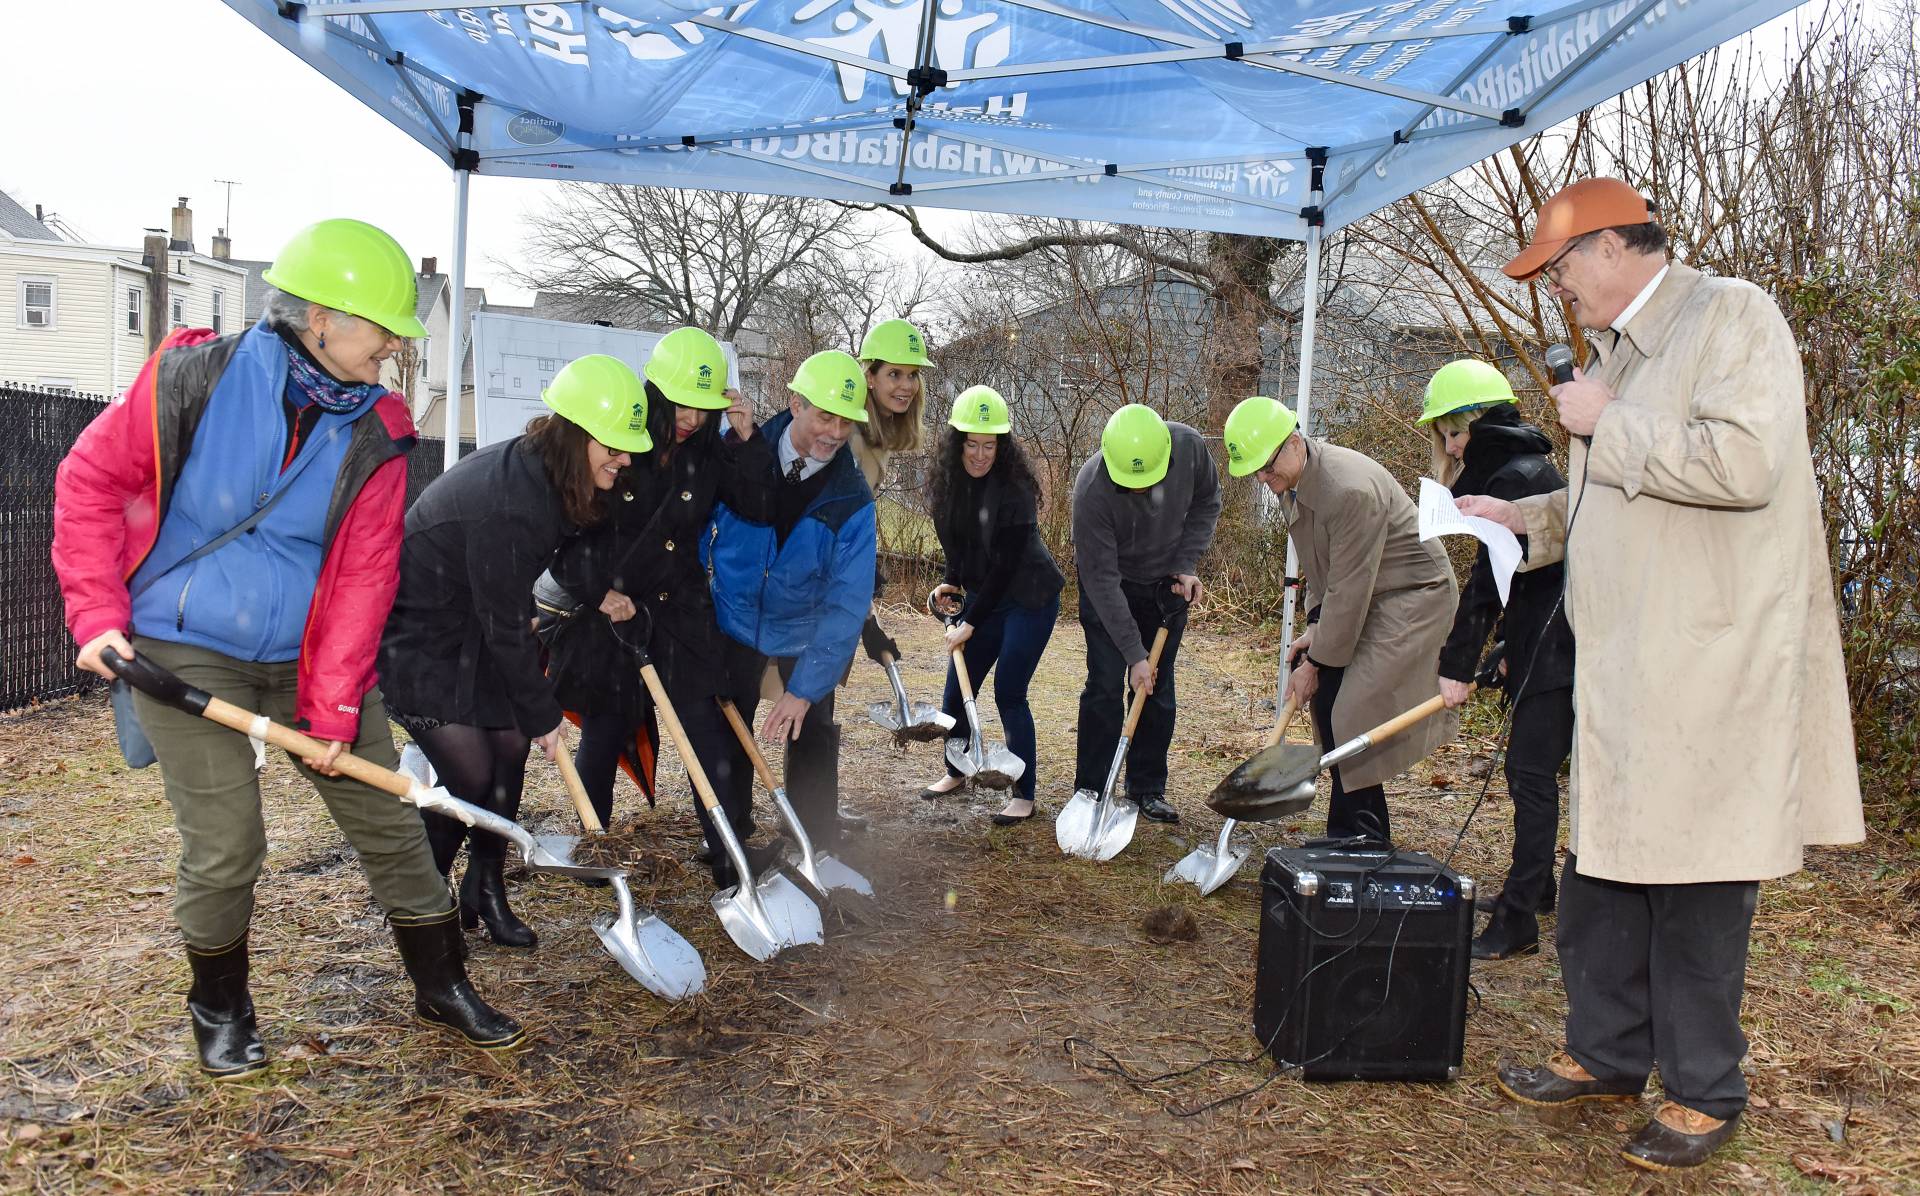 People from University, Princeton and Habitat for Humanity lifting shovels at ground breaking ceremony